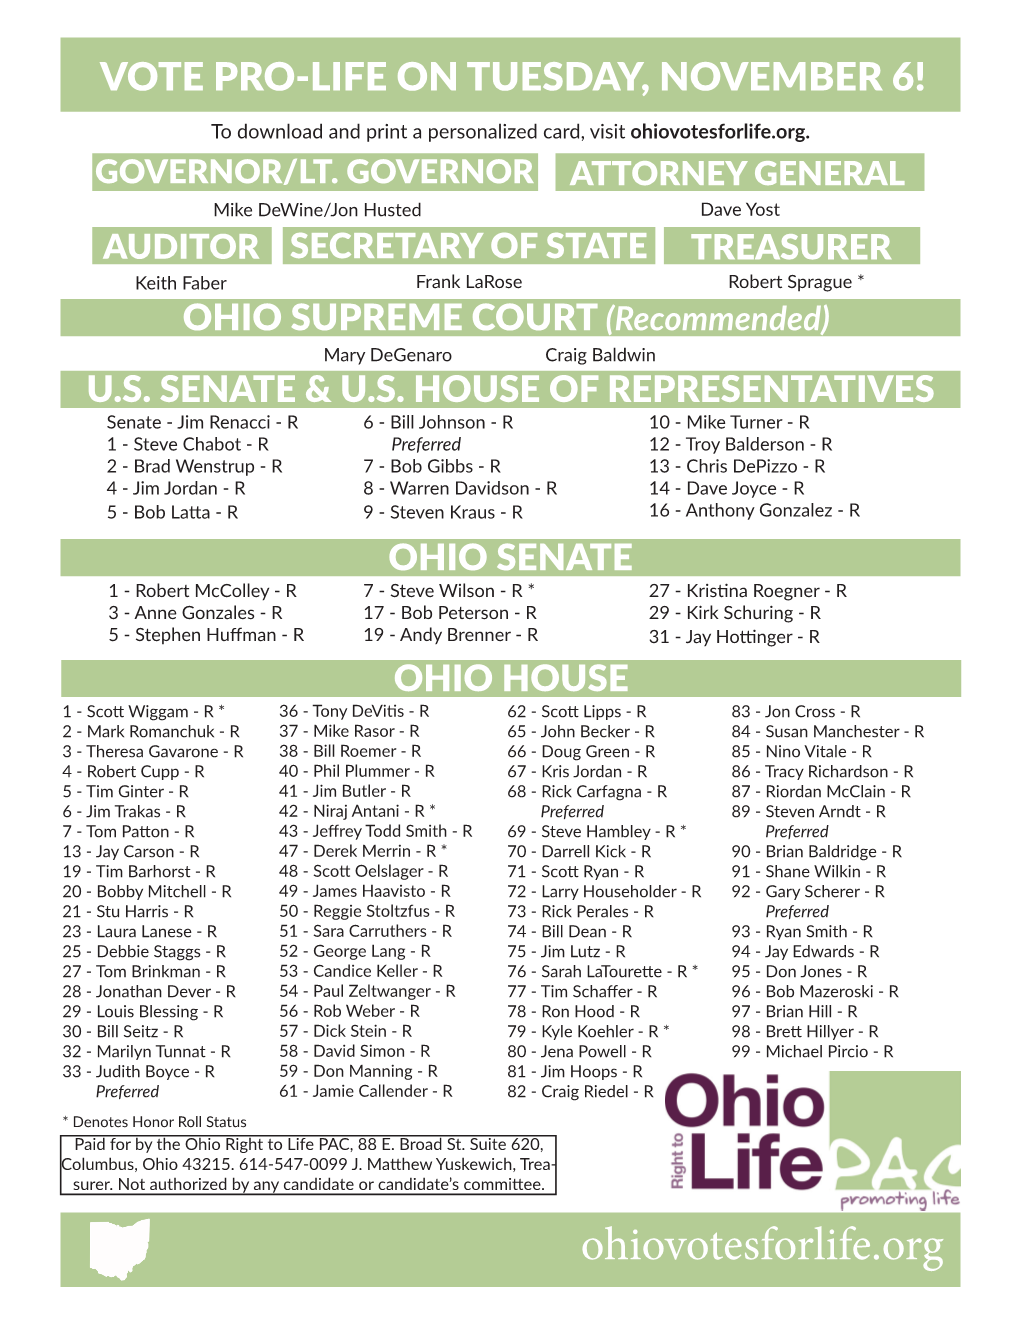 Statewide Endorsements